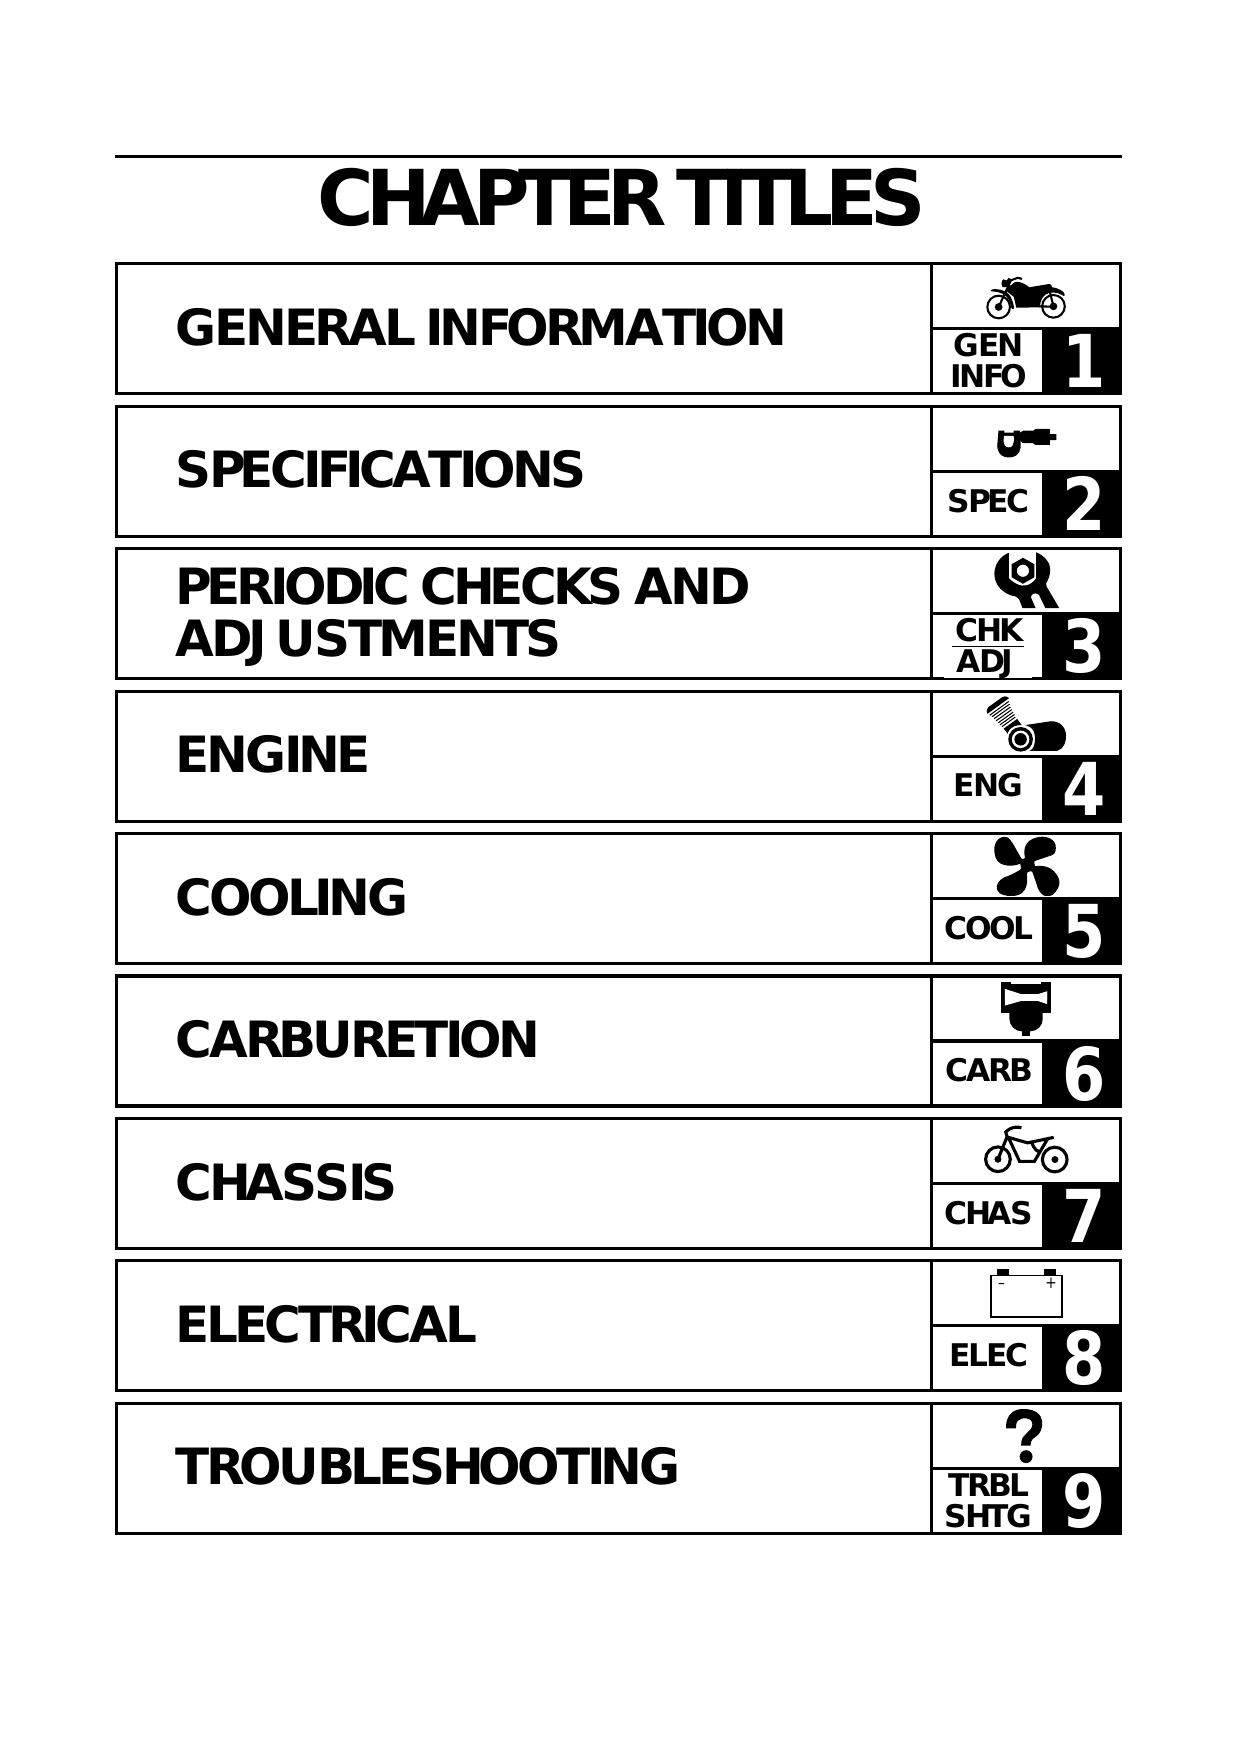 1998-2002 Yamaha YZF-R1 service manual Preview image 5